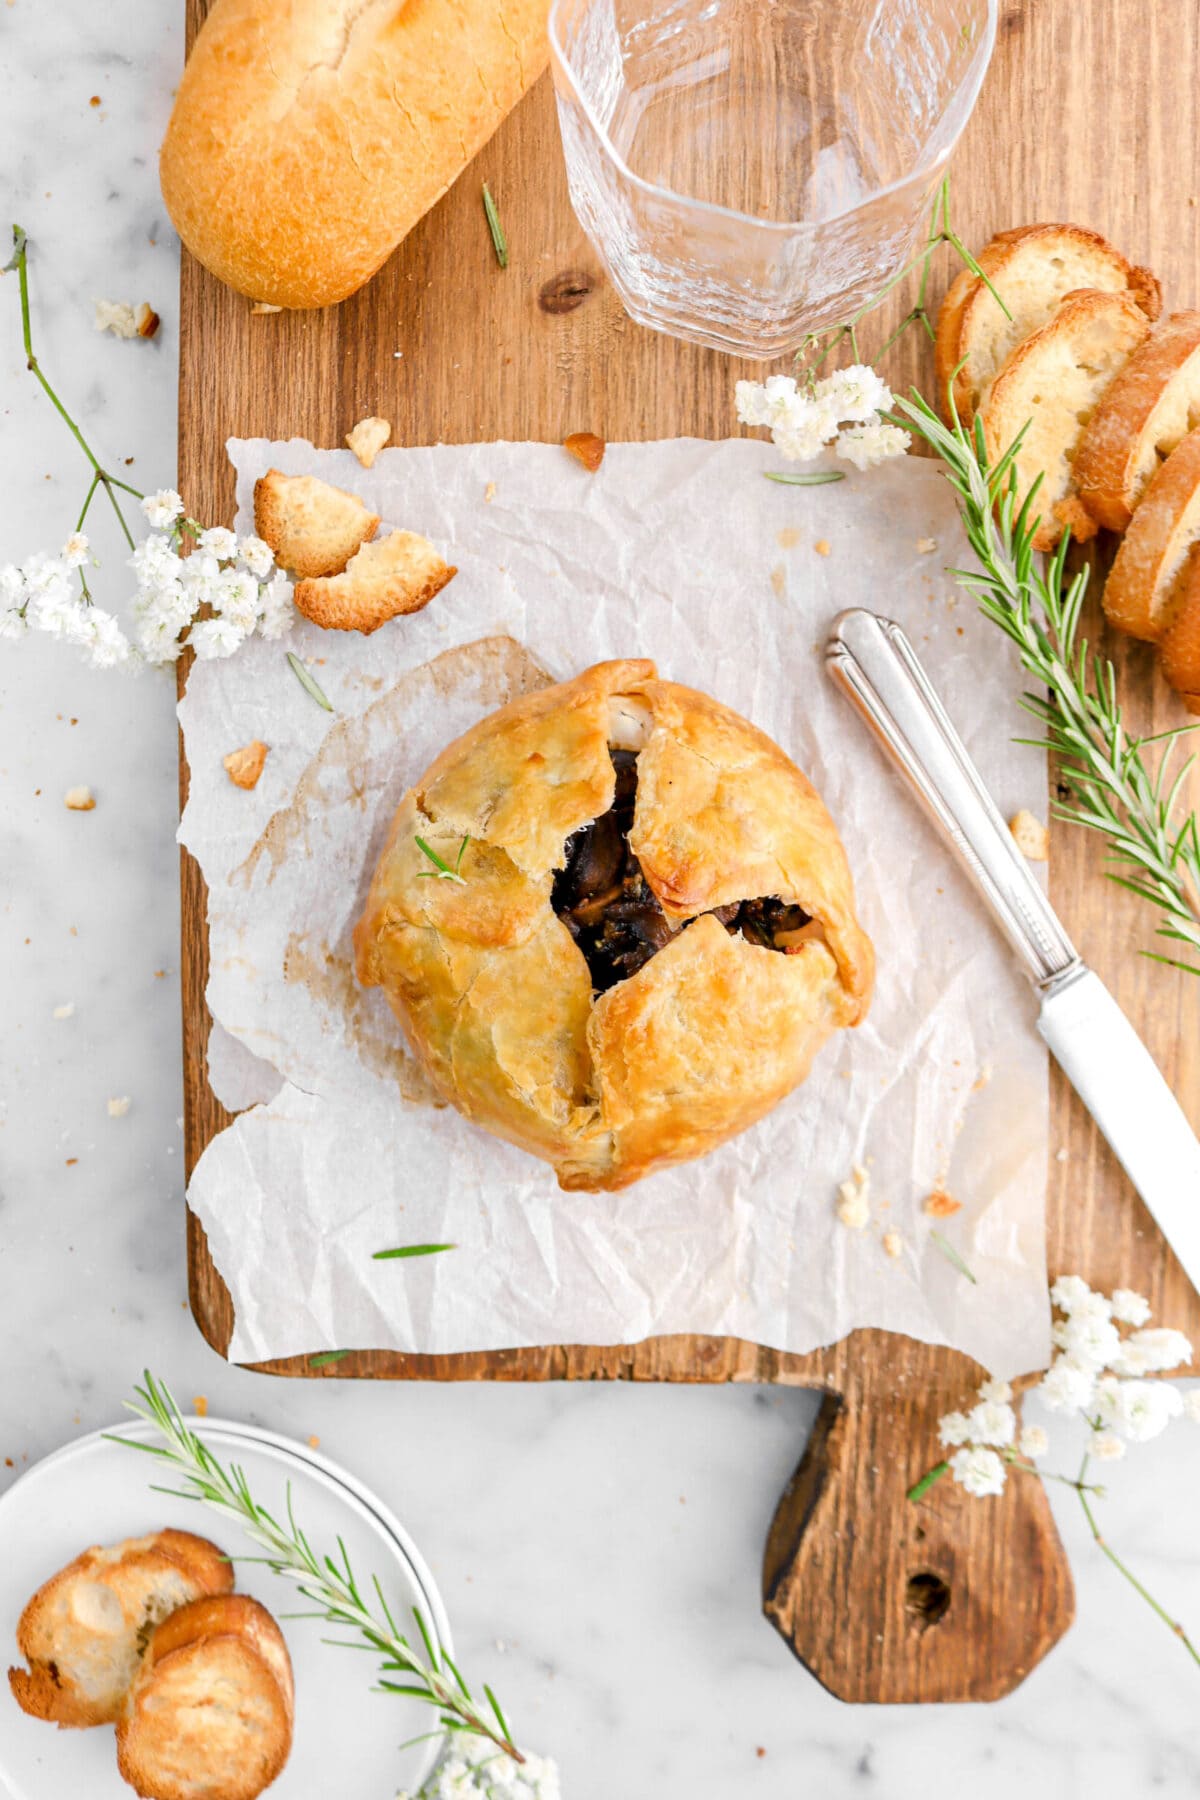 baked brie wrapped in puff pastry on square piece of parchment on wood surface with knife, rosemary sprigs, white flowers, and toasted bread slices around.